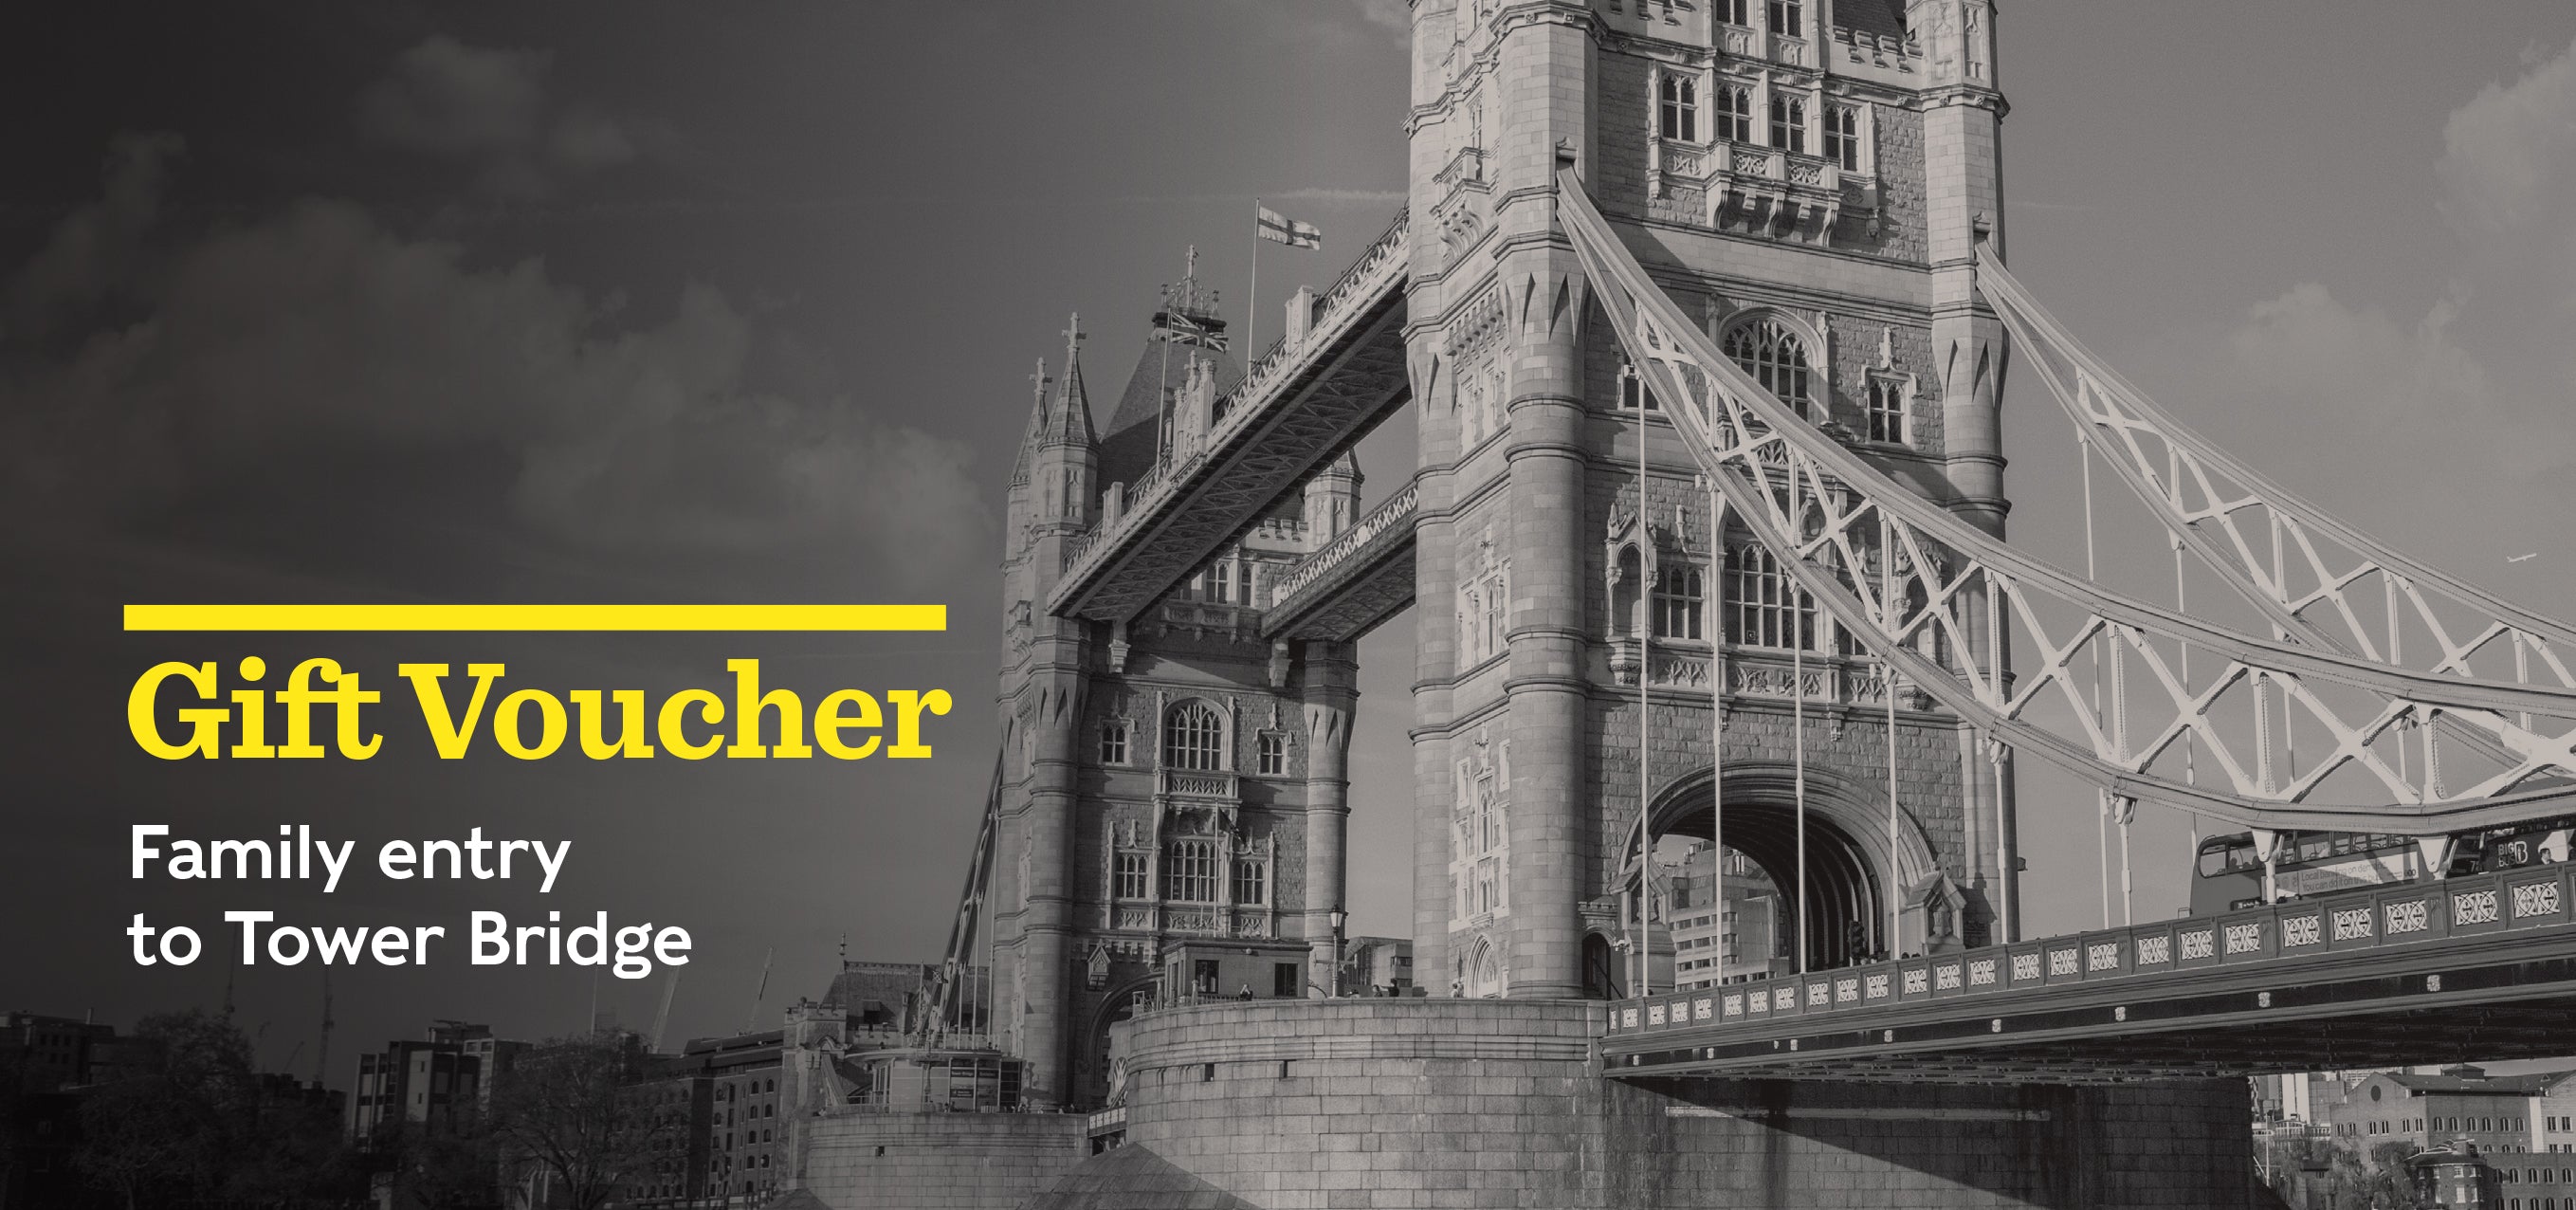 Gift Voucher - Family entry to Tower Bridge